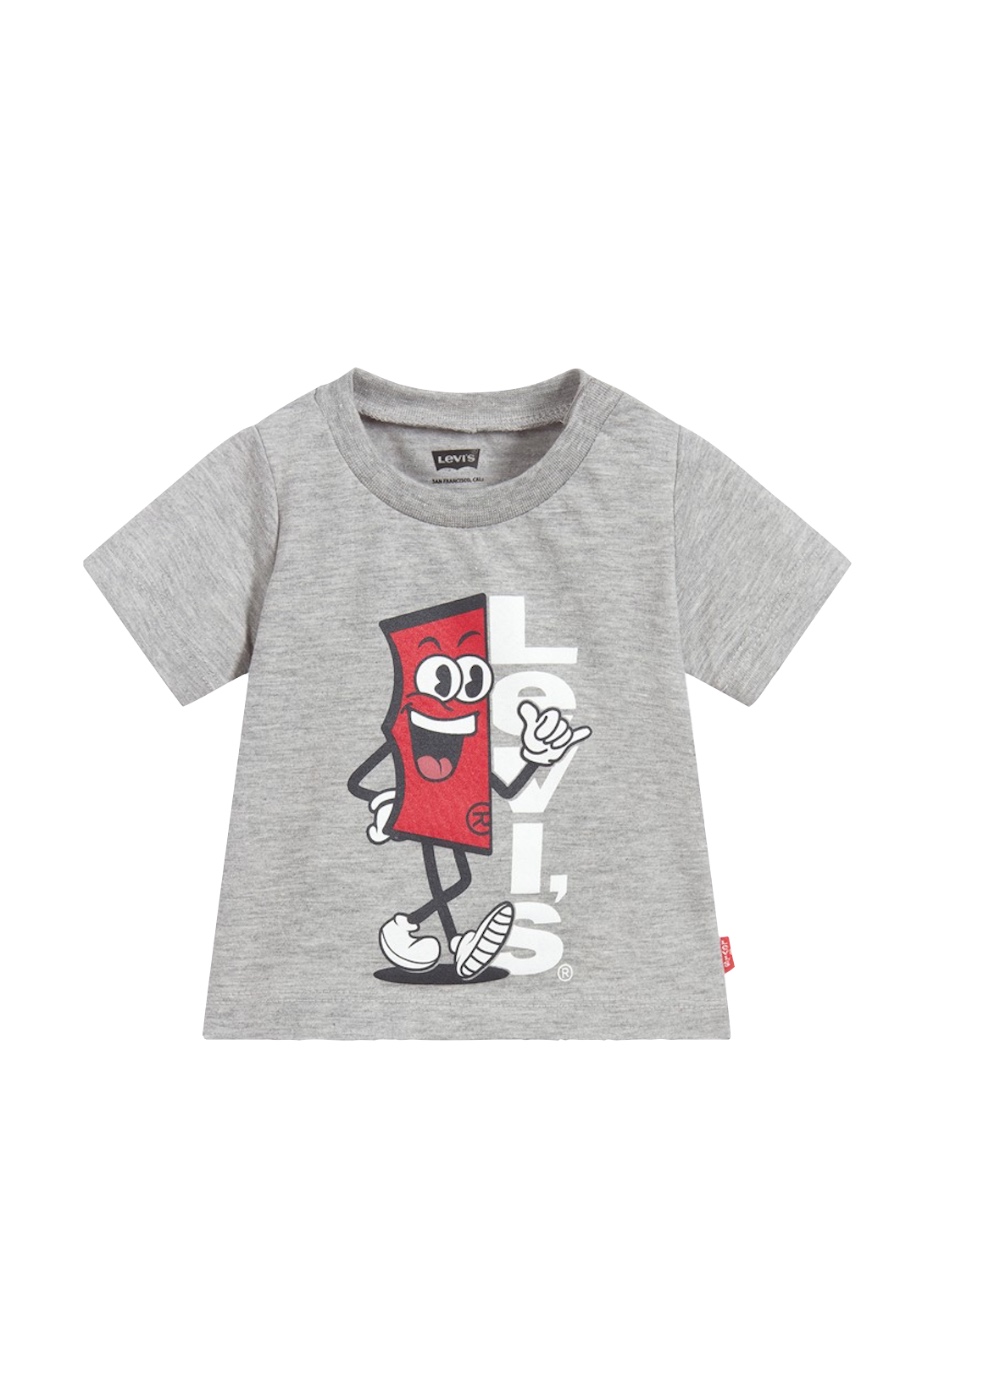 Featured image for “LEVI'S T-SHIRT BEBÈ”